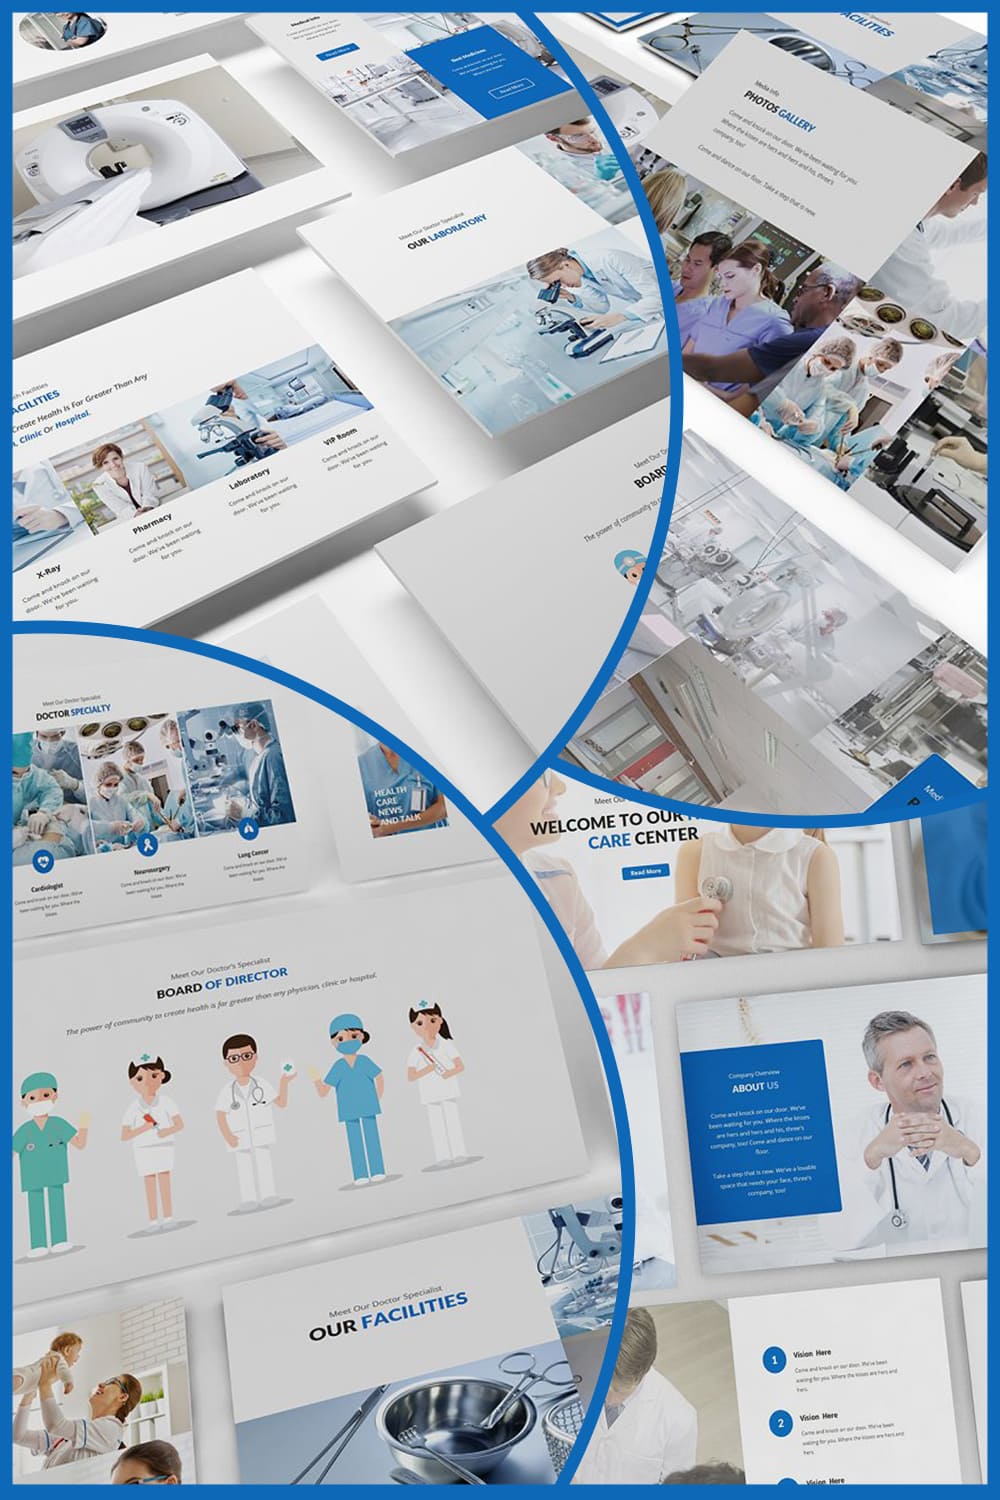 This template might be the best option, introducing Medical and Health Care Google Slides Template.